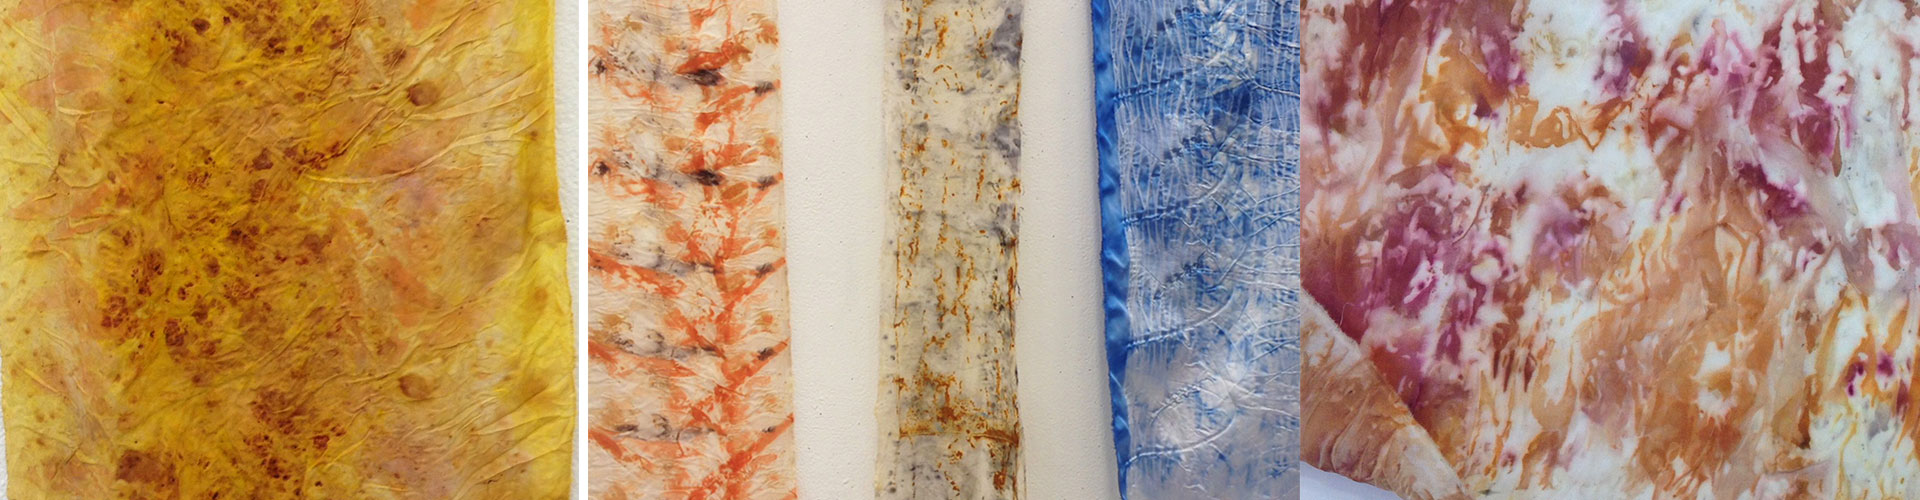 RAW: EXPERIMENTAL TEXTILE DYING AND STAINING WITH SUE PEDLEY, SATURDAY 6 OCTOBER